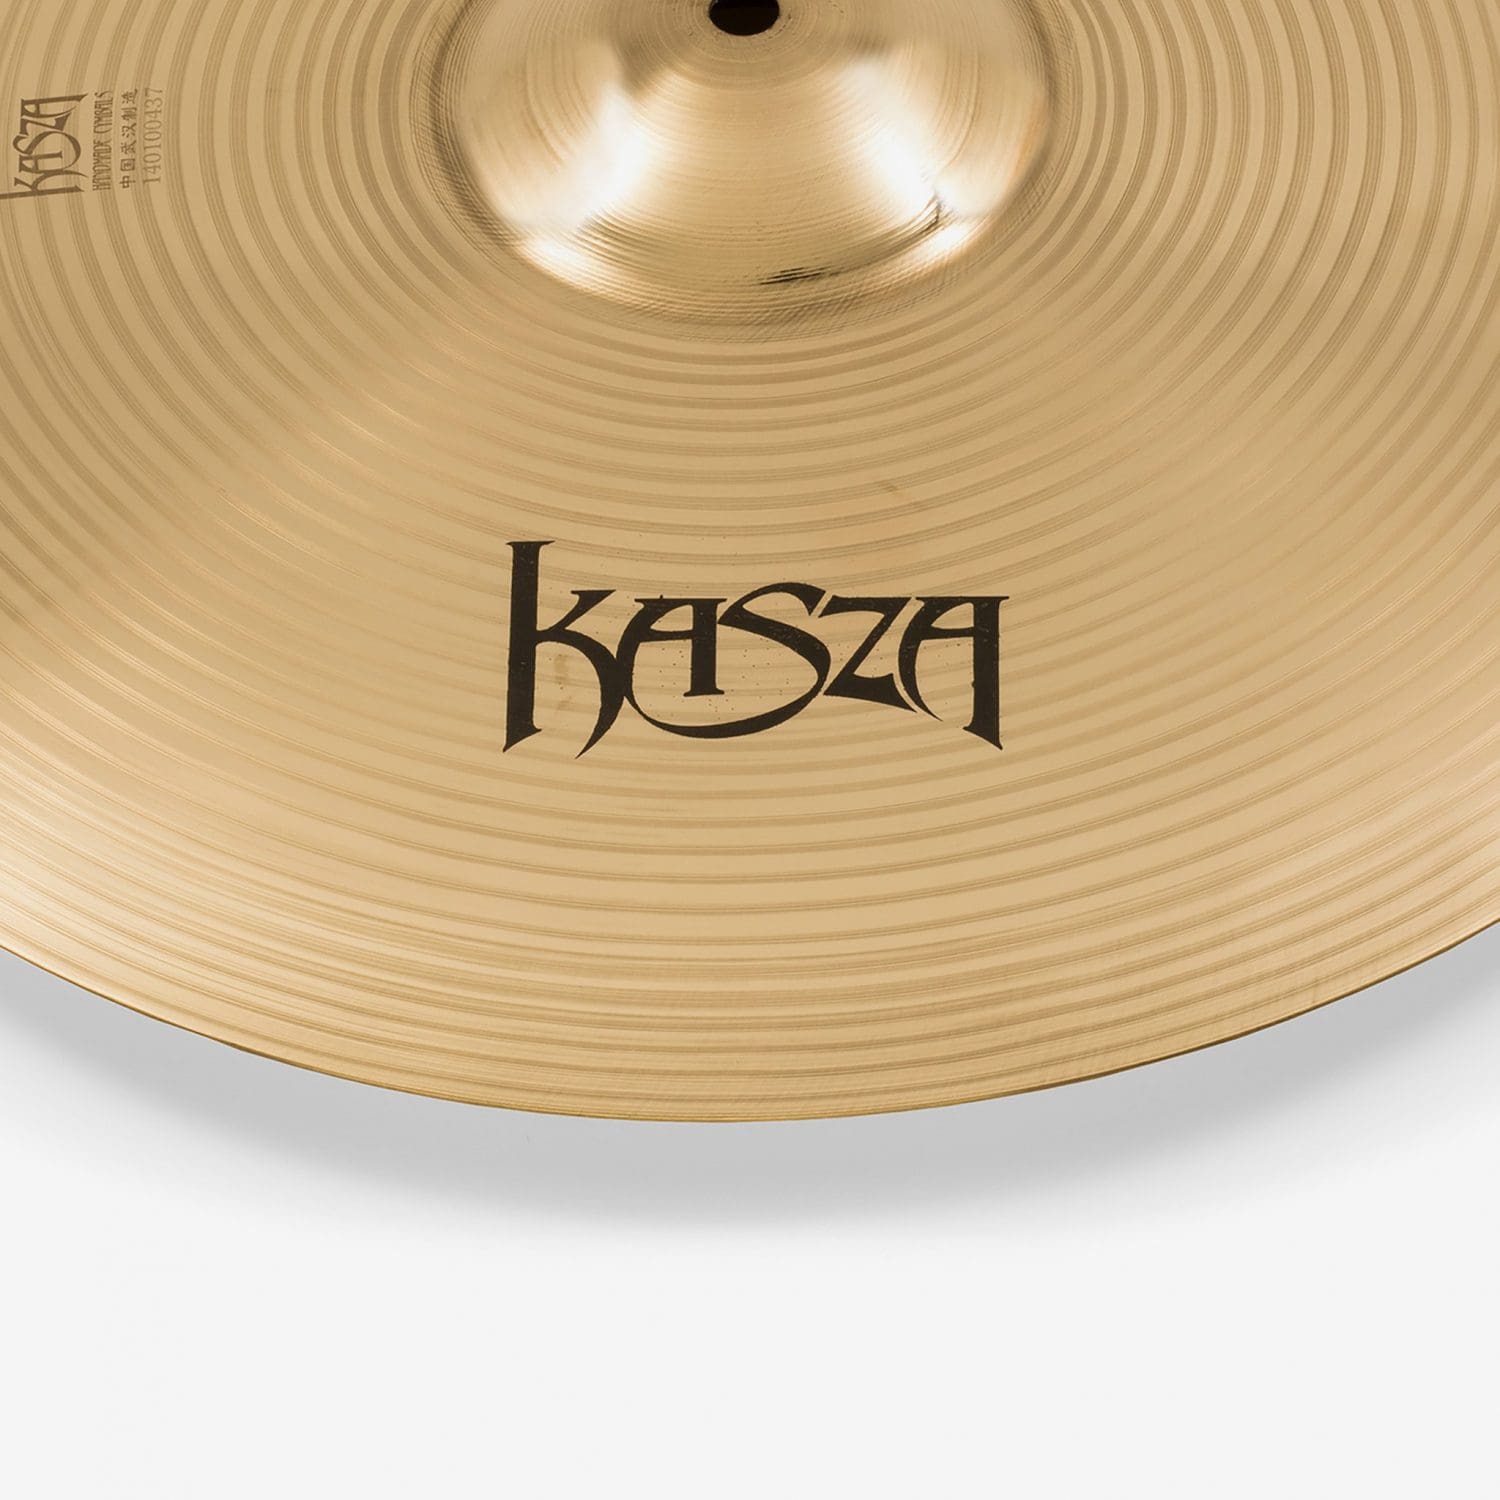 R Series Marching Cymbals